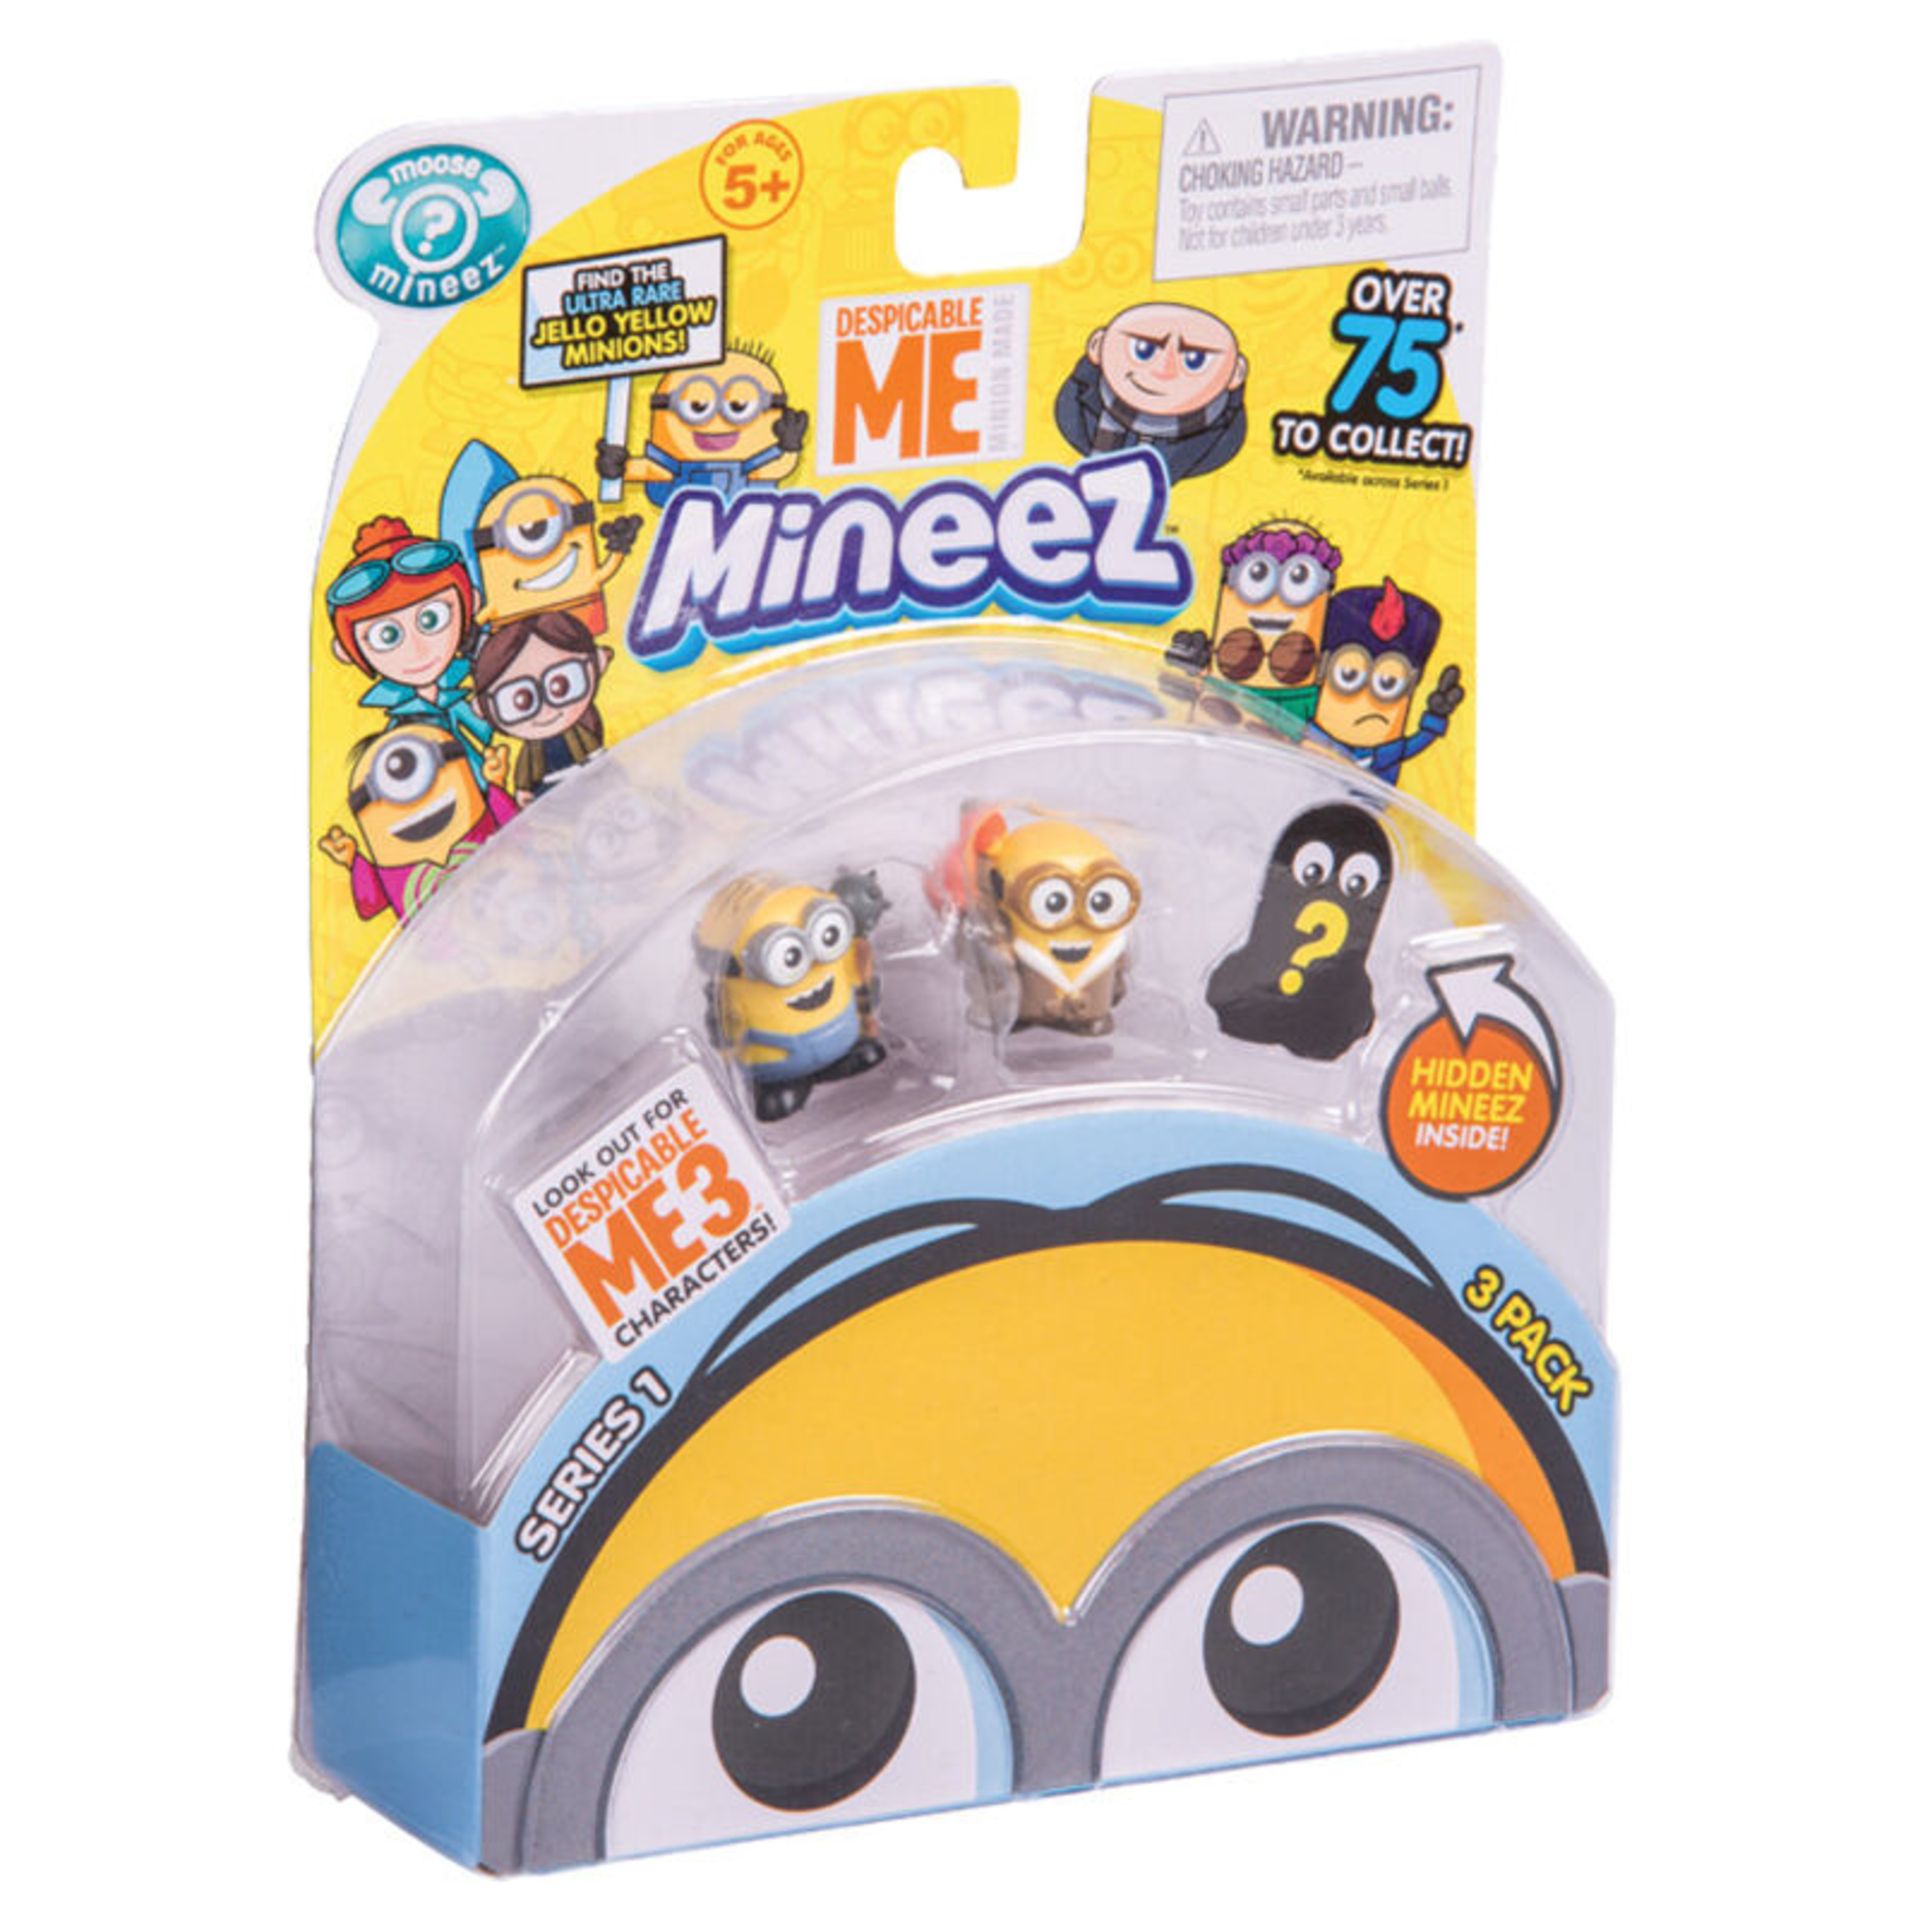 20.packs Brand new Sealed Minions figures - 20 packs in lot - assorted figures in pack